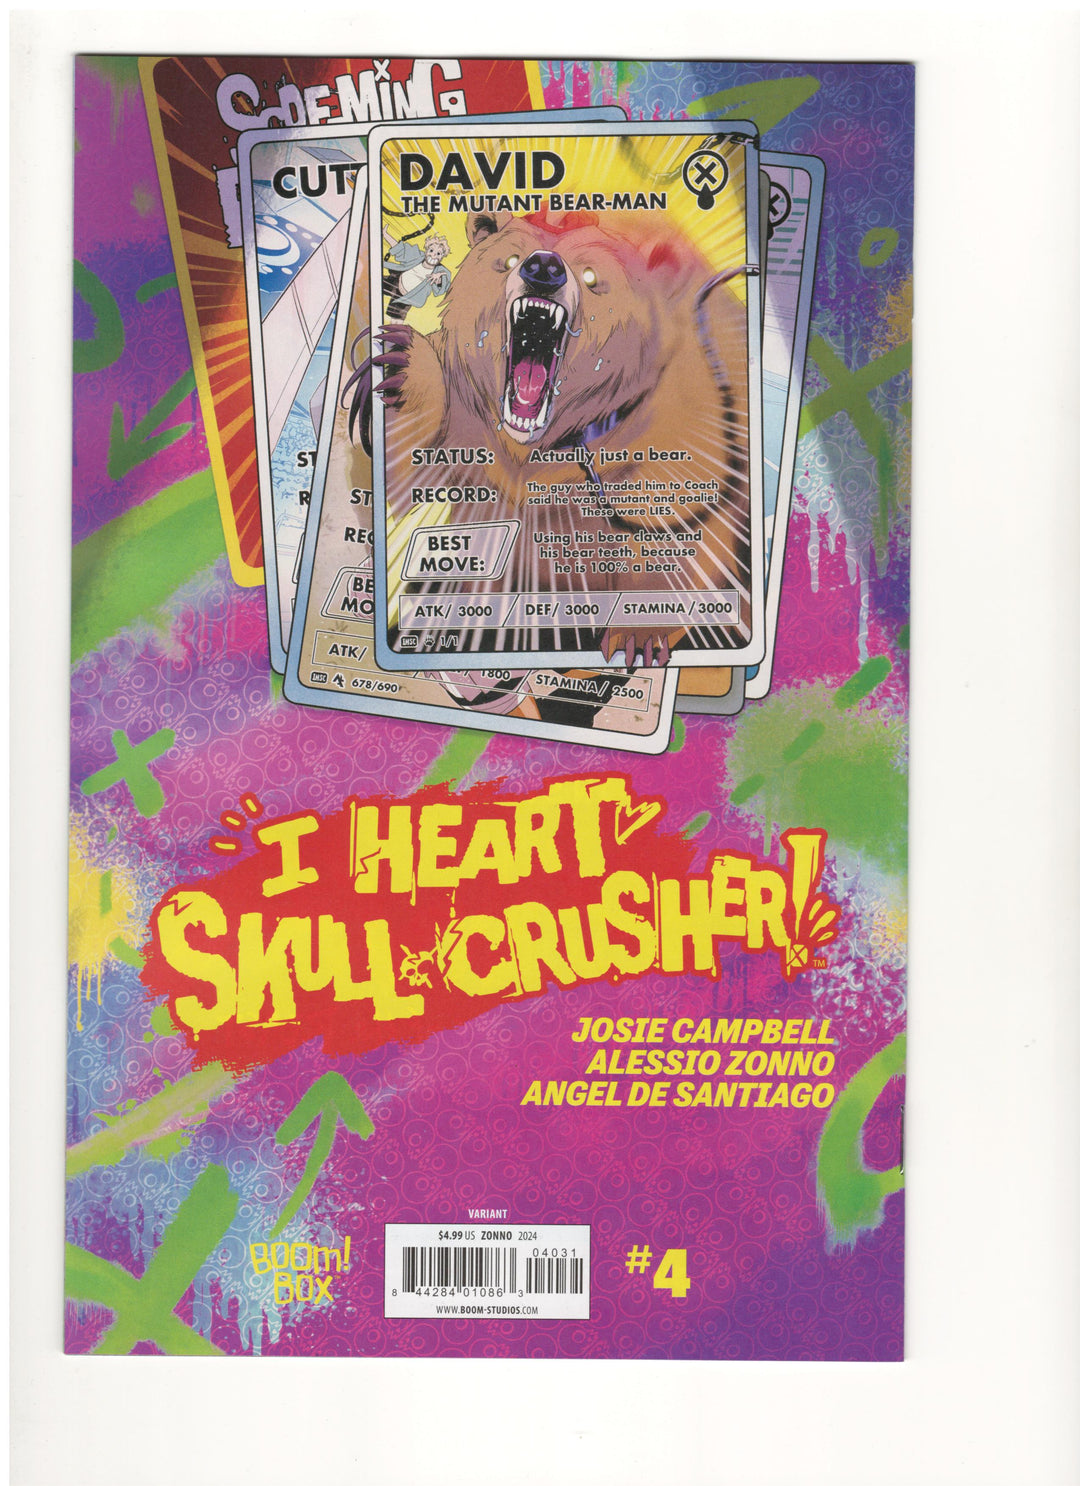 I Heart Skull-Crusher #4 (Of 5) Cover C (1:10) Zonno Couch Blood Virgin Variant Edition